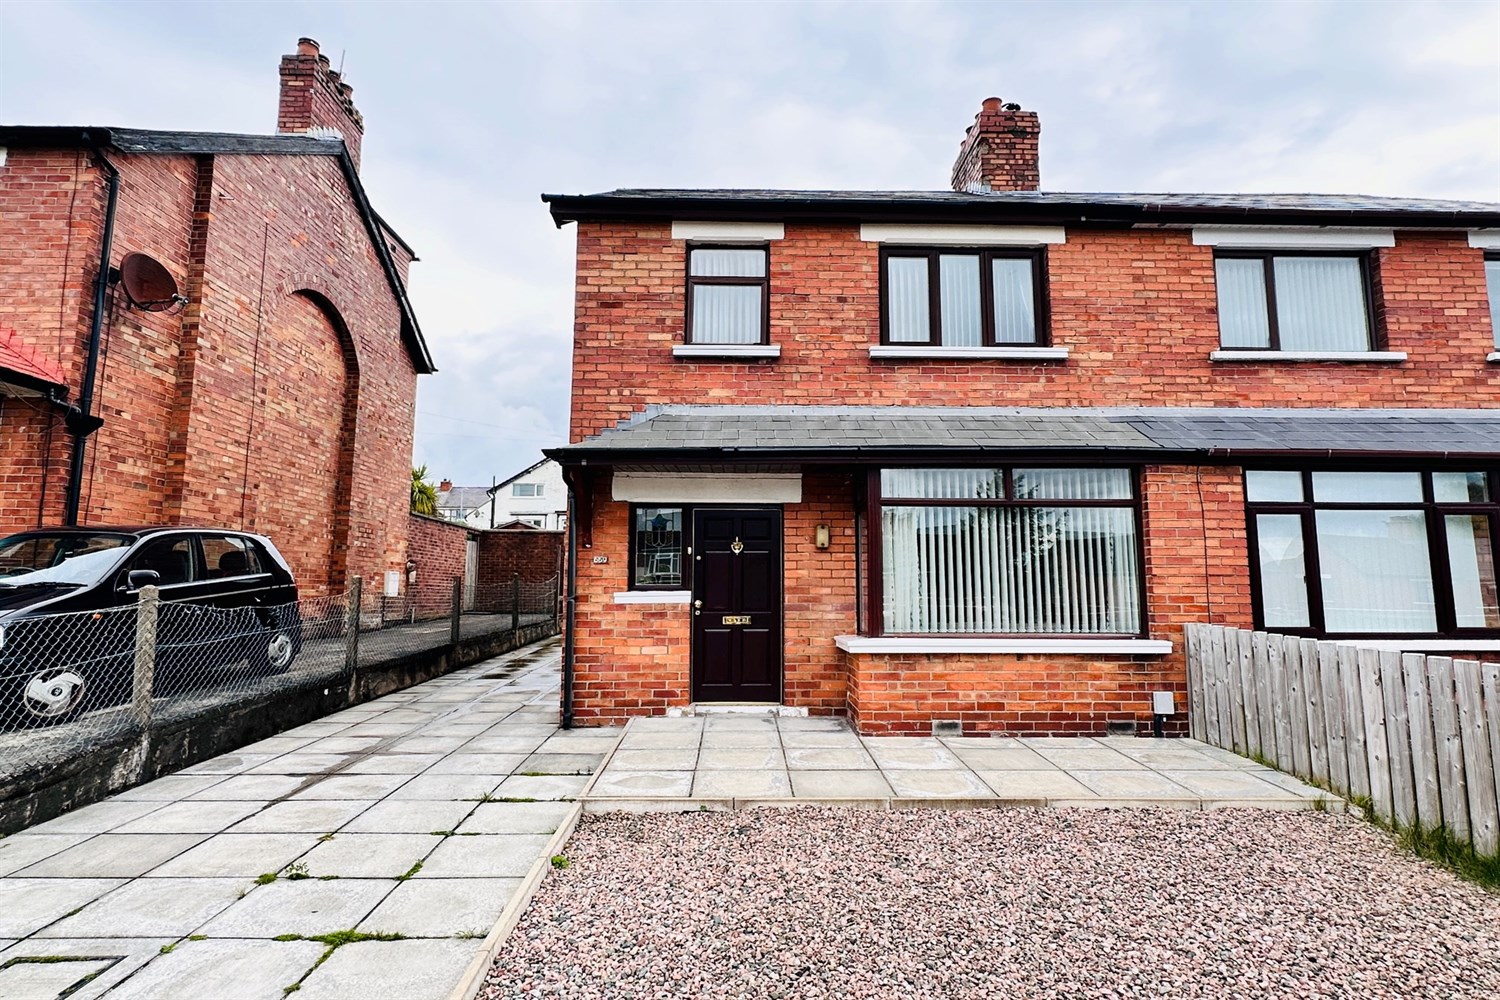 669 Oldpark Road, Belfast, BT14 6QY